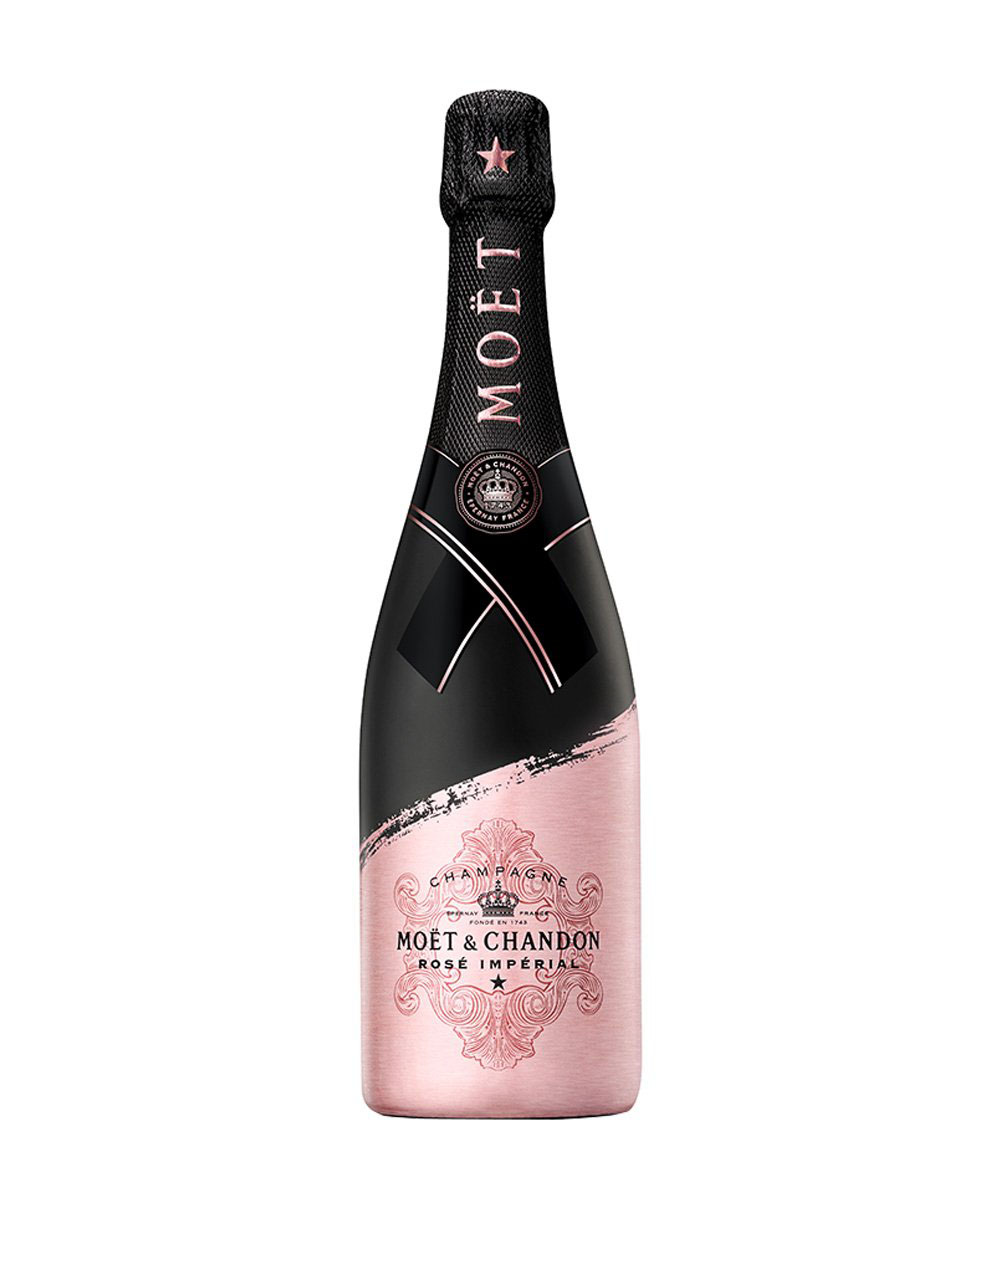 Moet & Chandon Brut Imperial Midnight Gold Case, Champagne